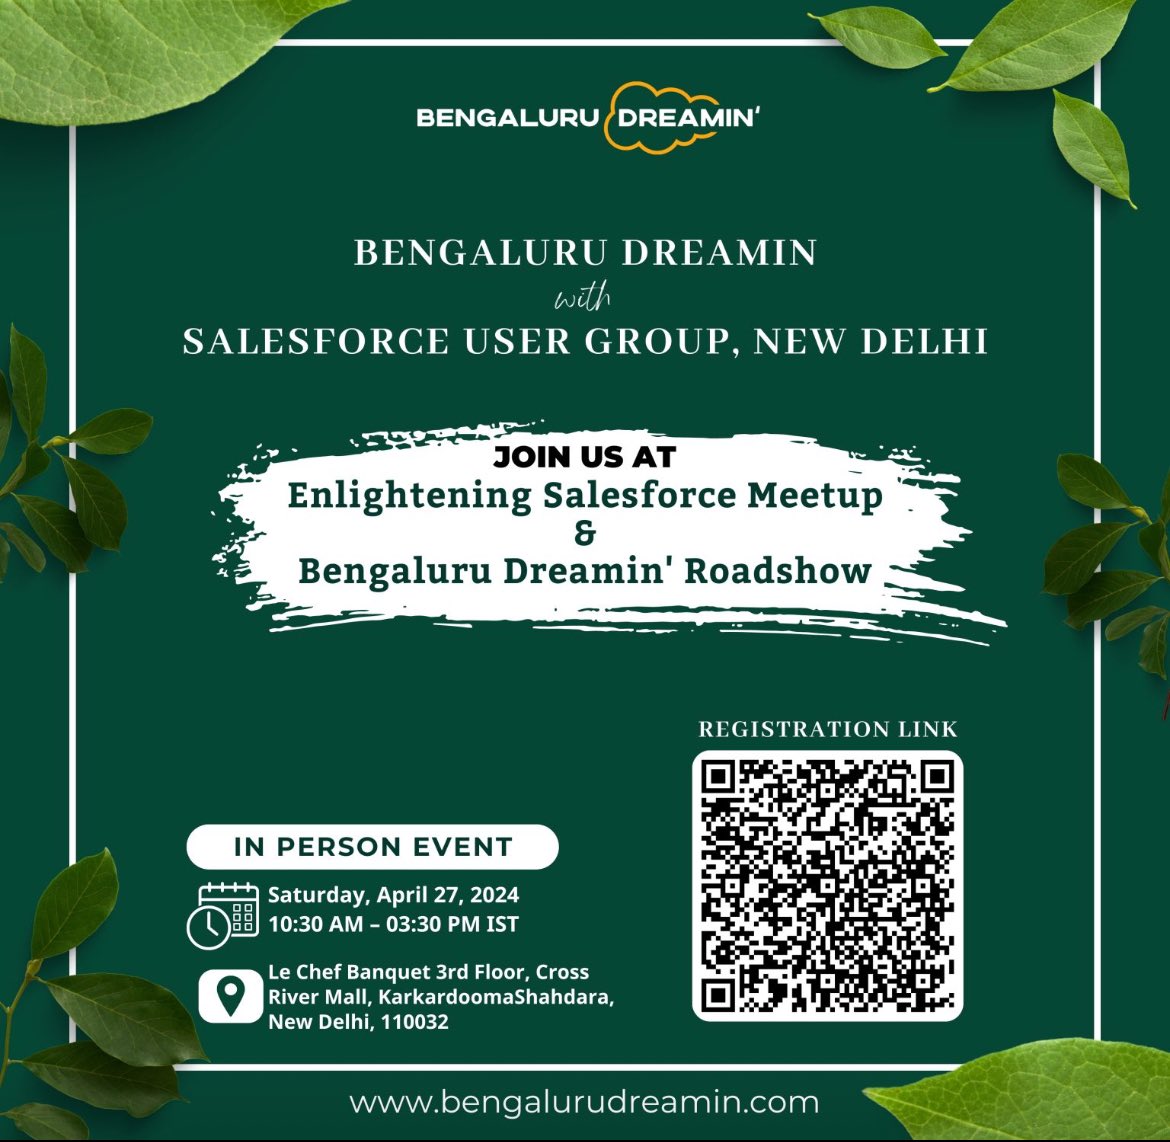 Hello #trailblazers

As a part of our Bengaluru Dreamin' RoadShow this Saturday our co-founder Rupalika Sahoo is traveling to the Capital of India to meet the beloved New Delhi trailblazer community 🤩

More details👇🏻
linkedin.com/posts/bengalur…

#BengaluruDreamin24 #Salesforce